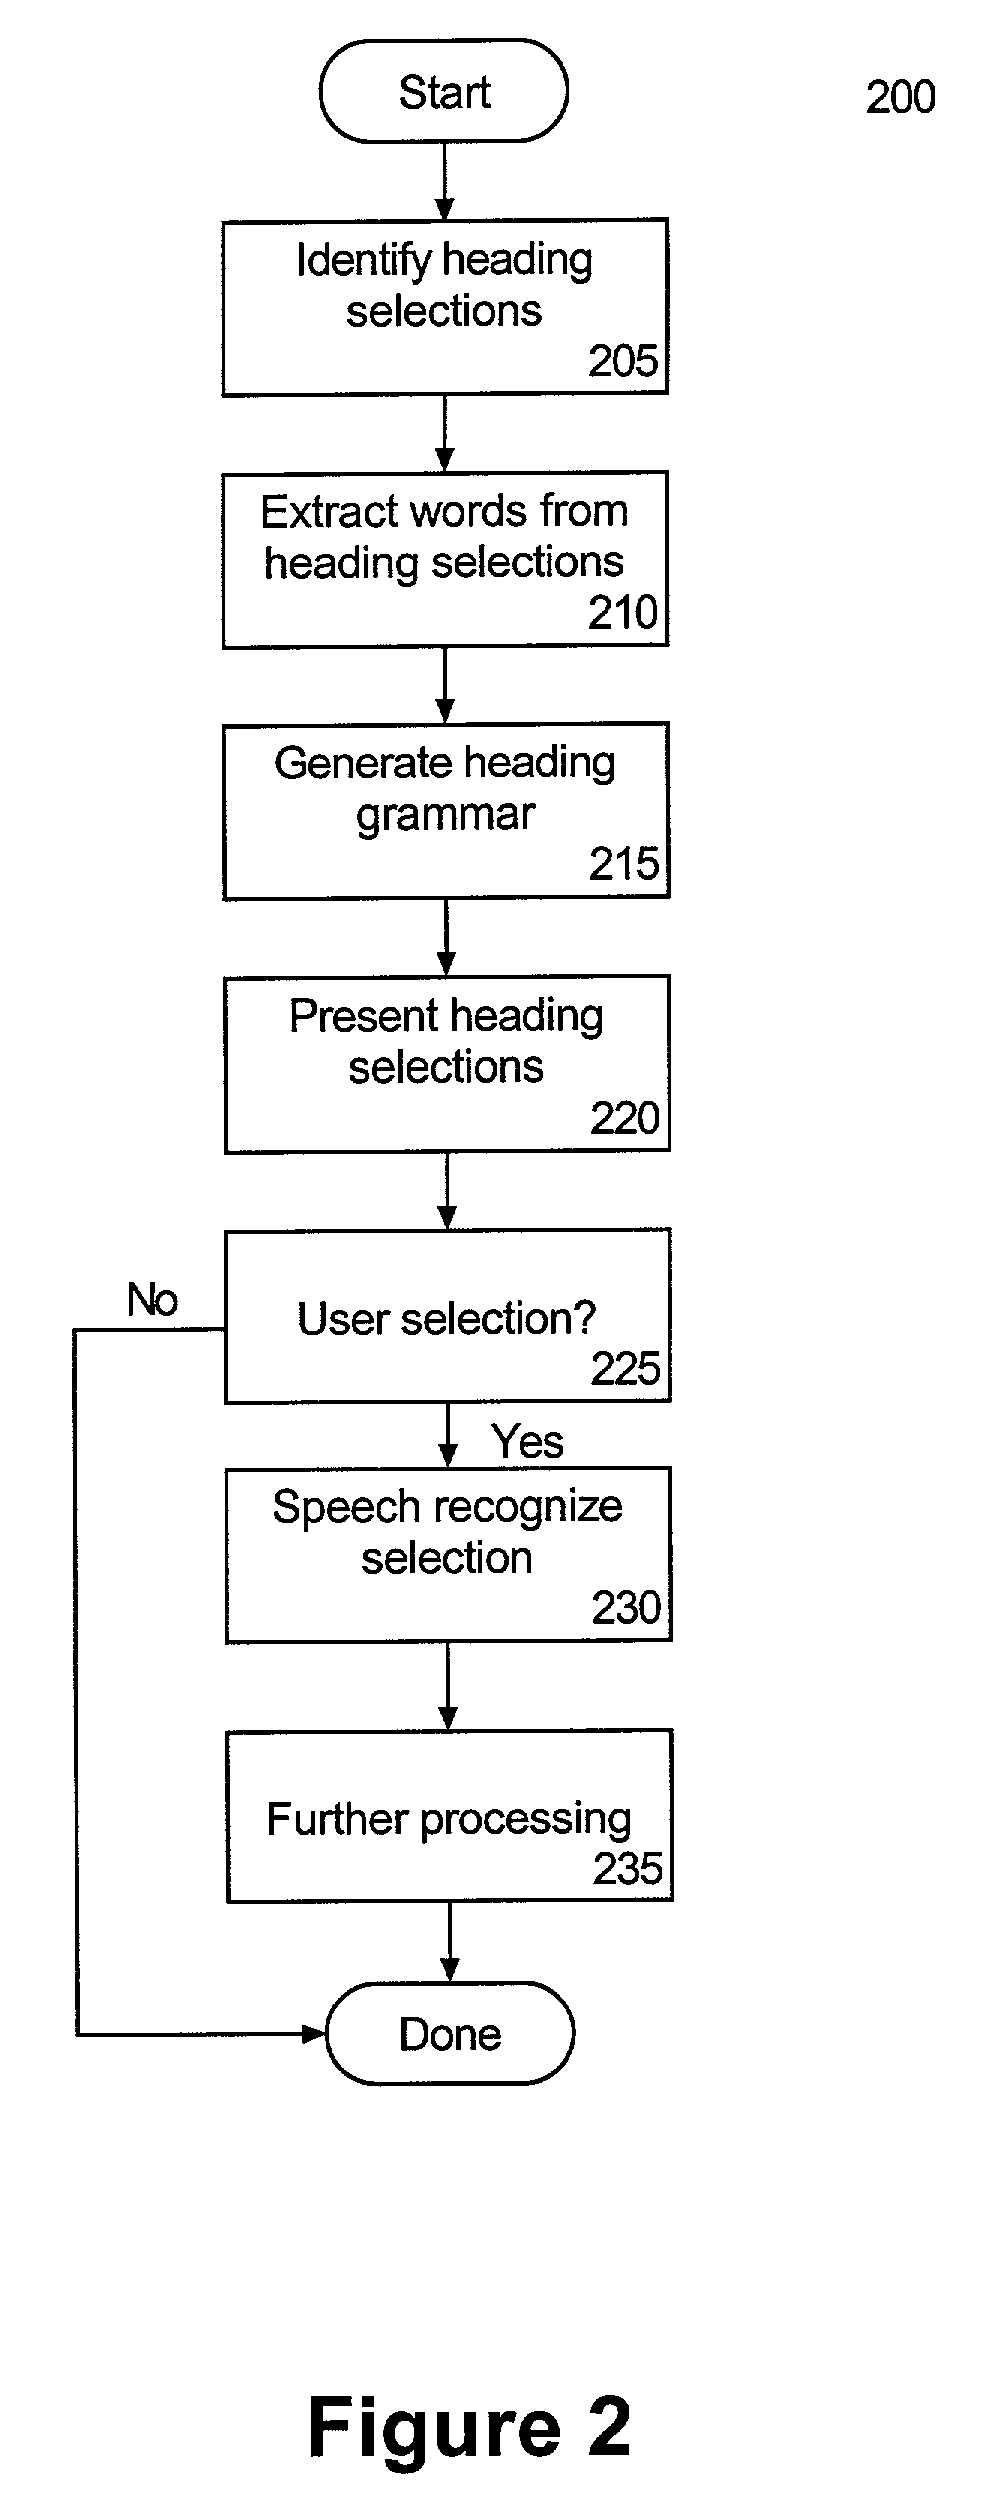 Automatic generation of efficient grammar for heading selection